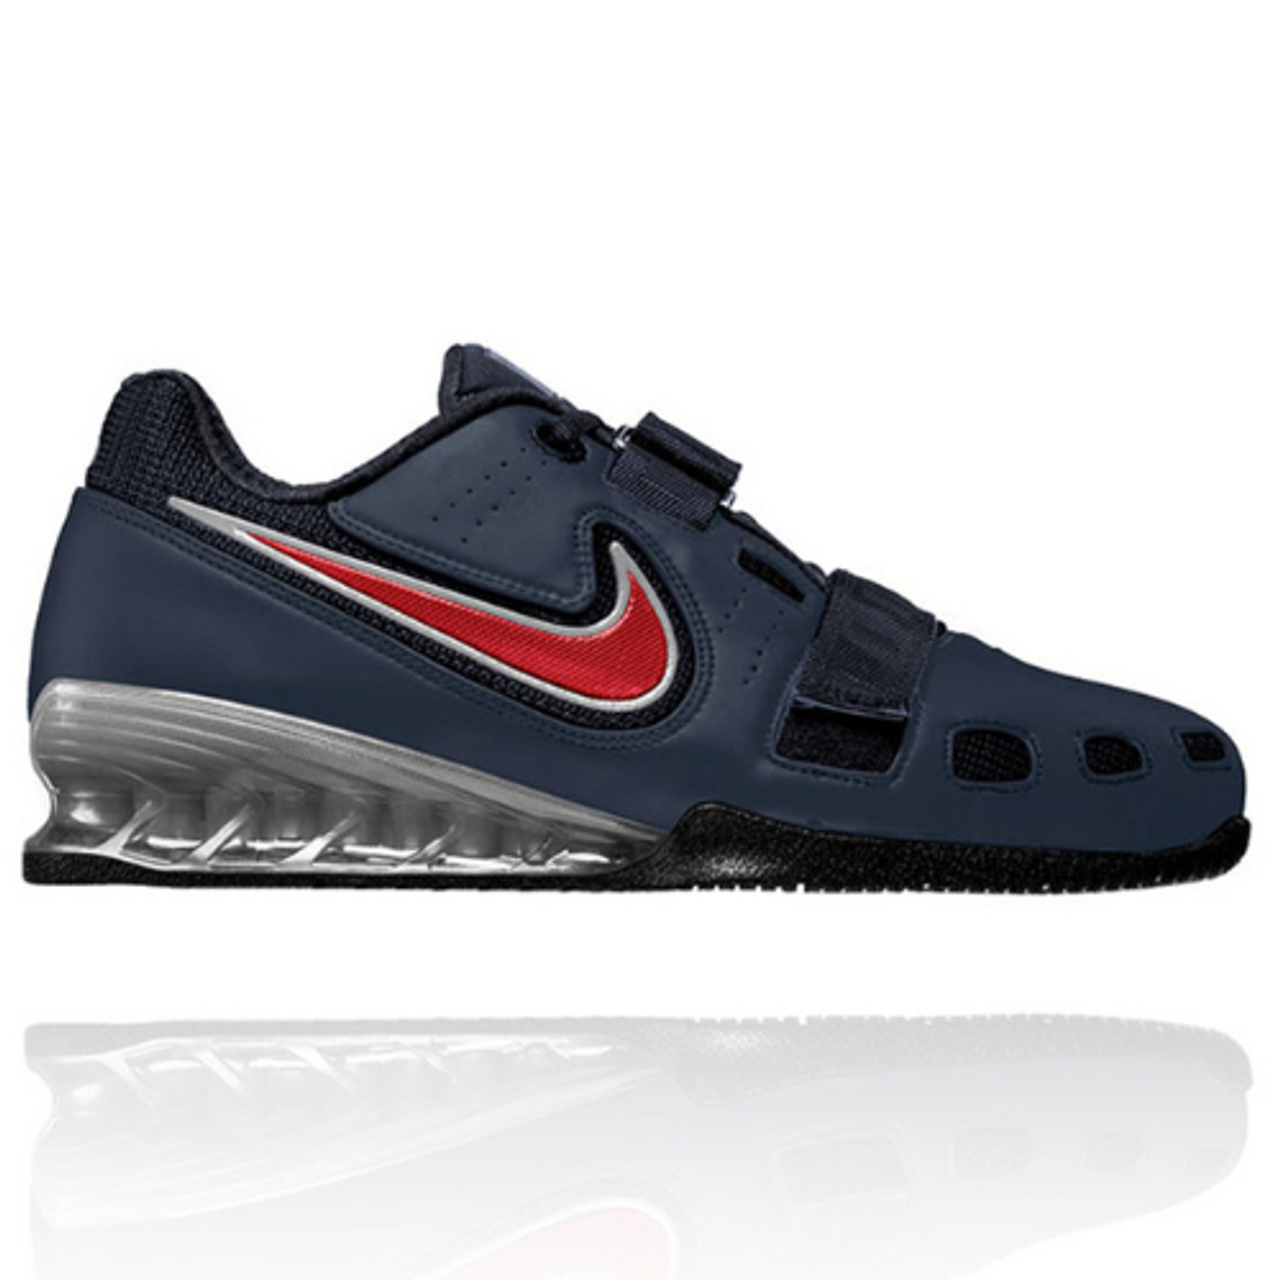 Nike Romaleos 2 Weightlifting Shoes (Multiple Colors)